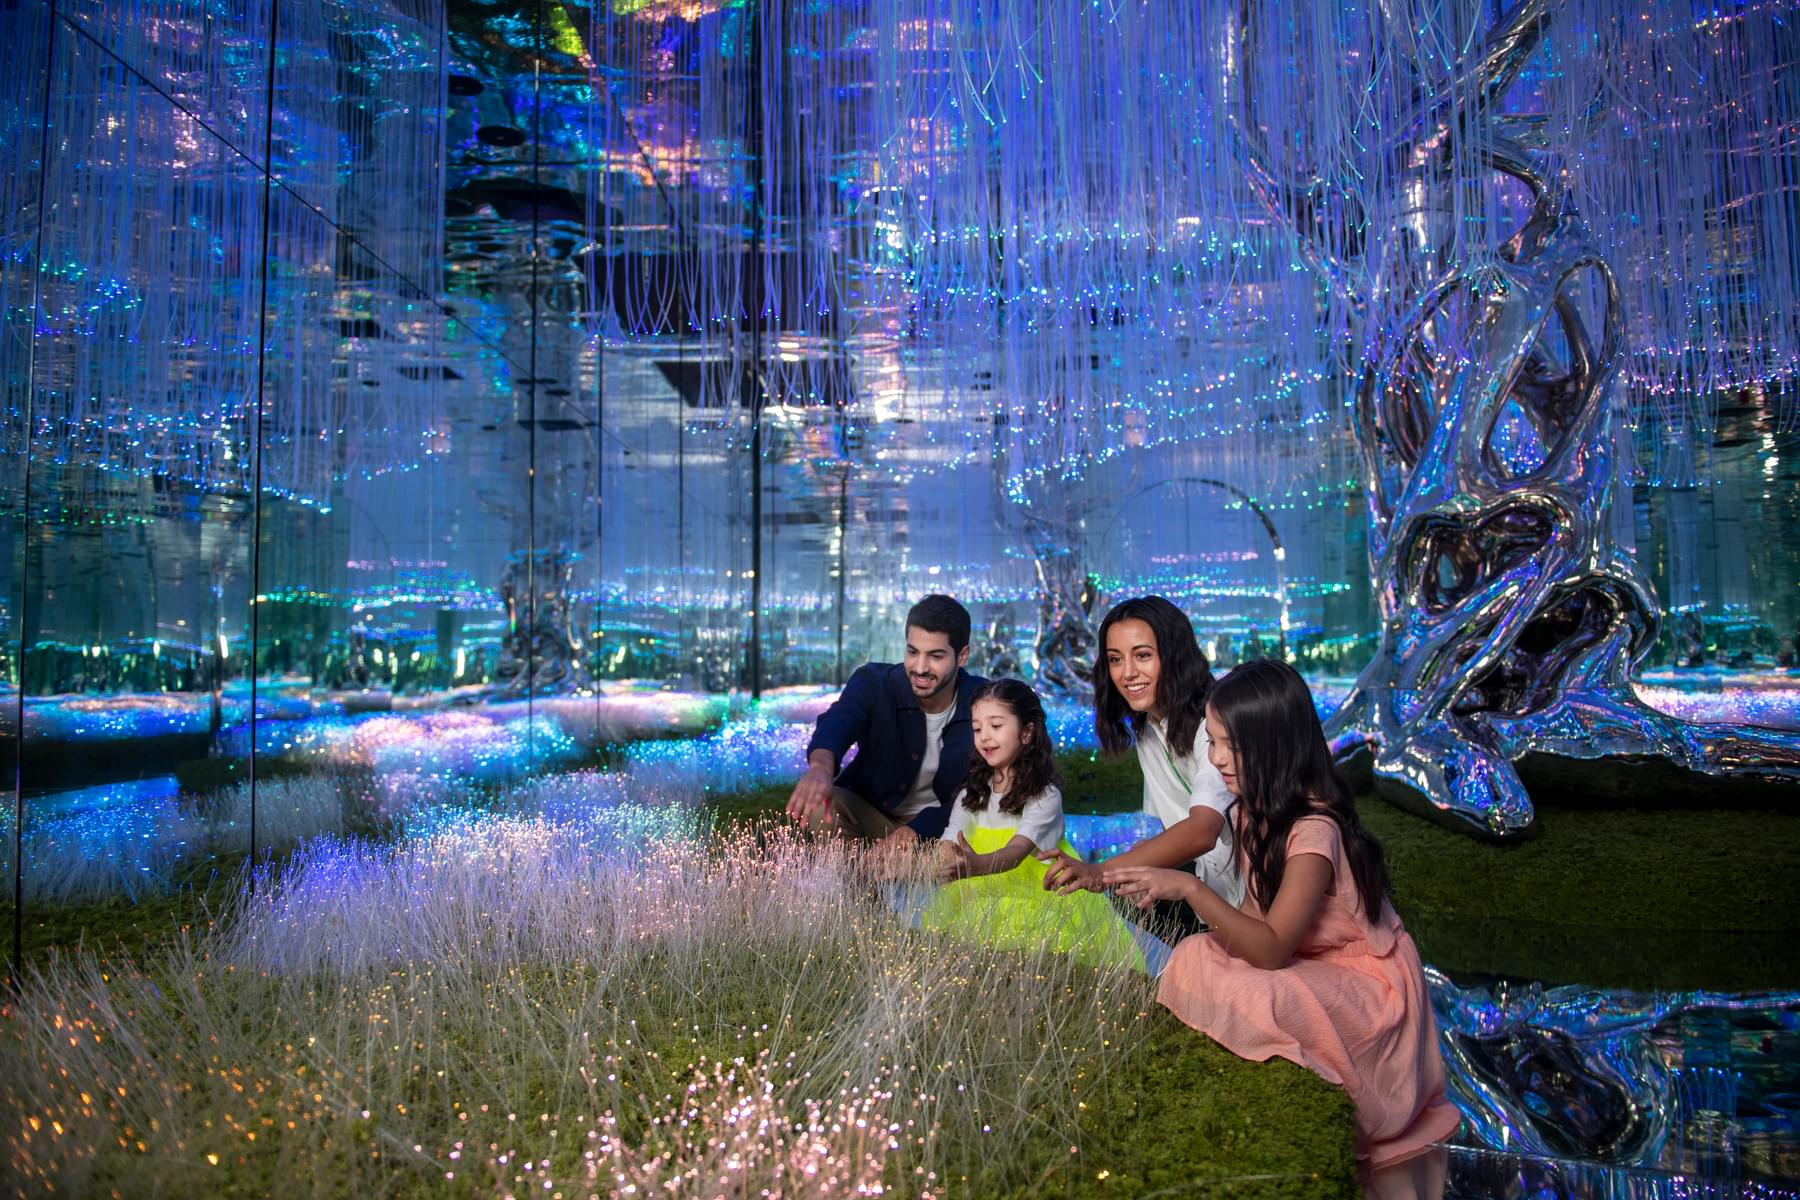 Marvel at the bioluminescent garden at the Flora attraction